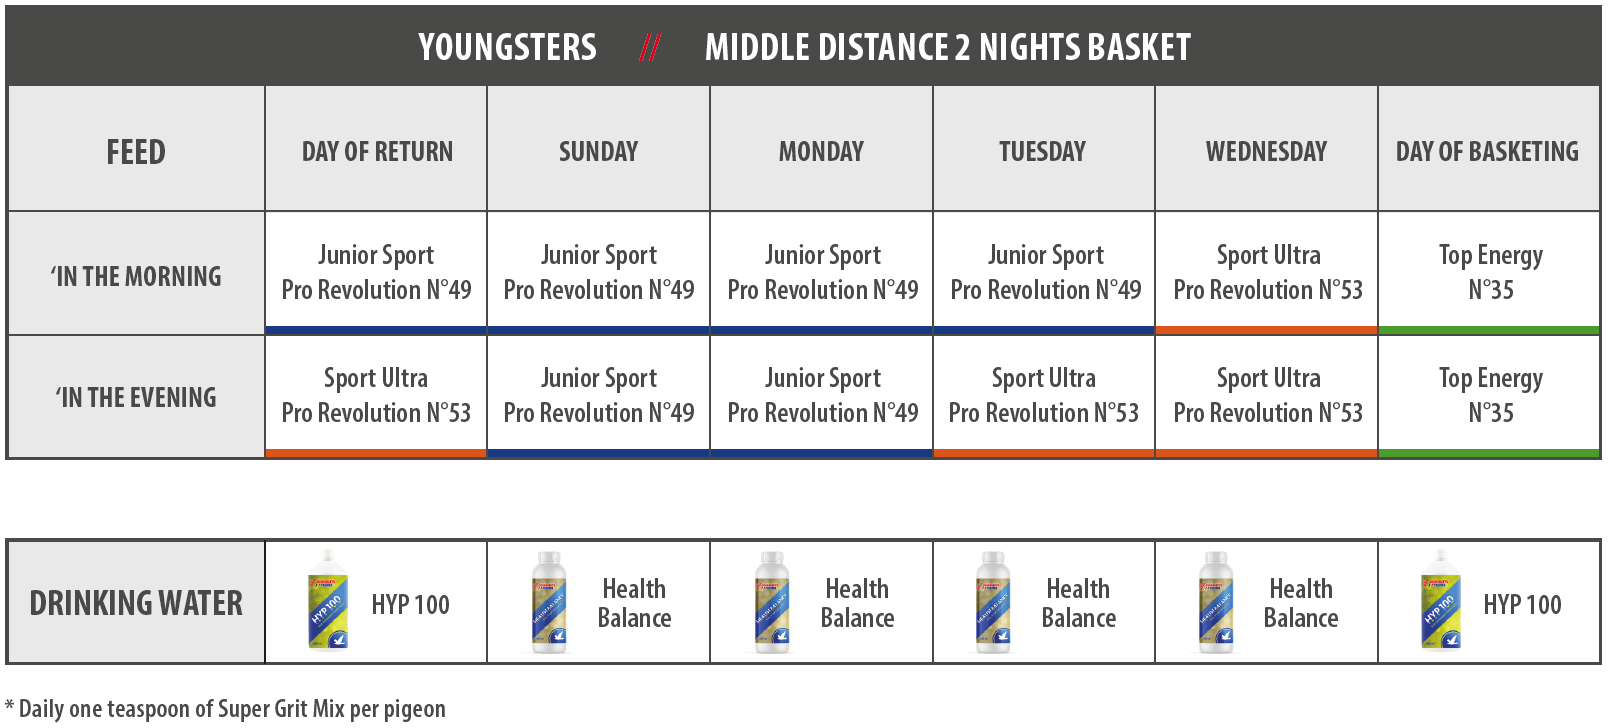 Youngsters Middle Distance 2 nights basket